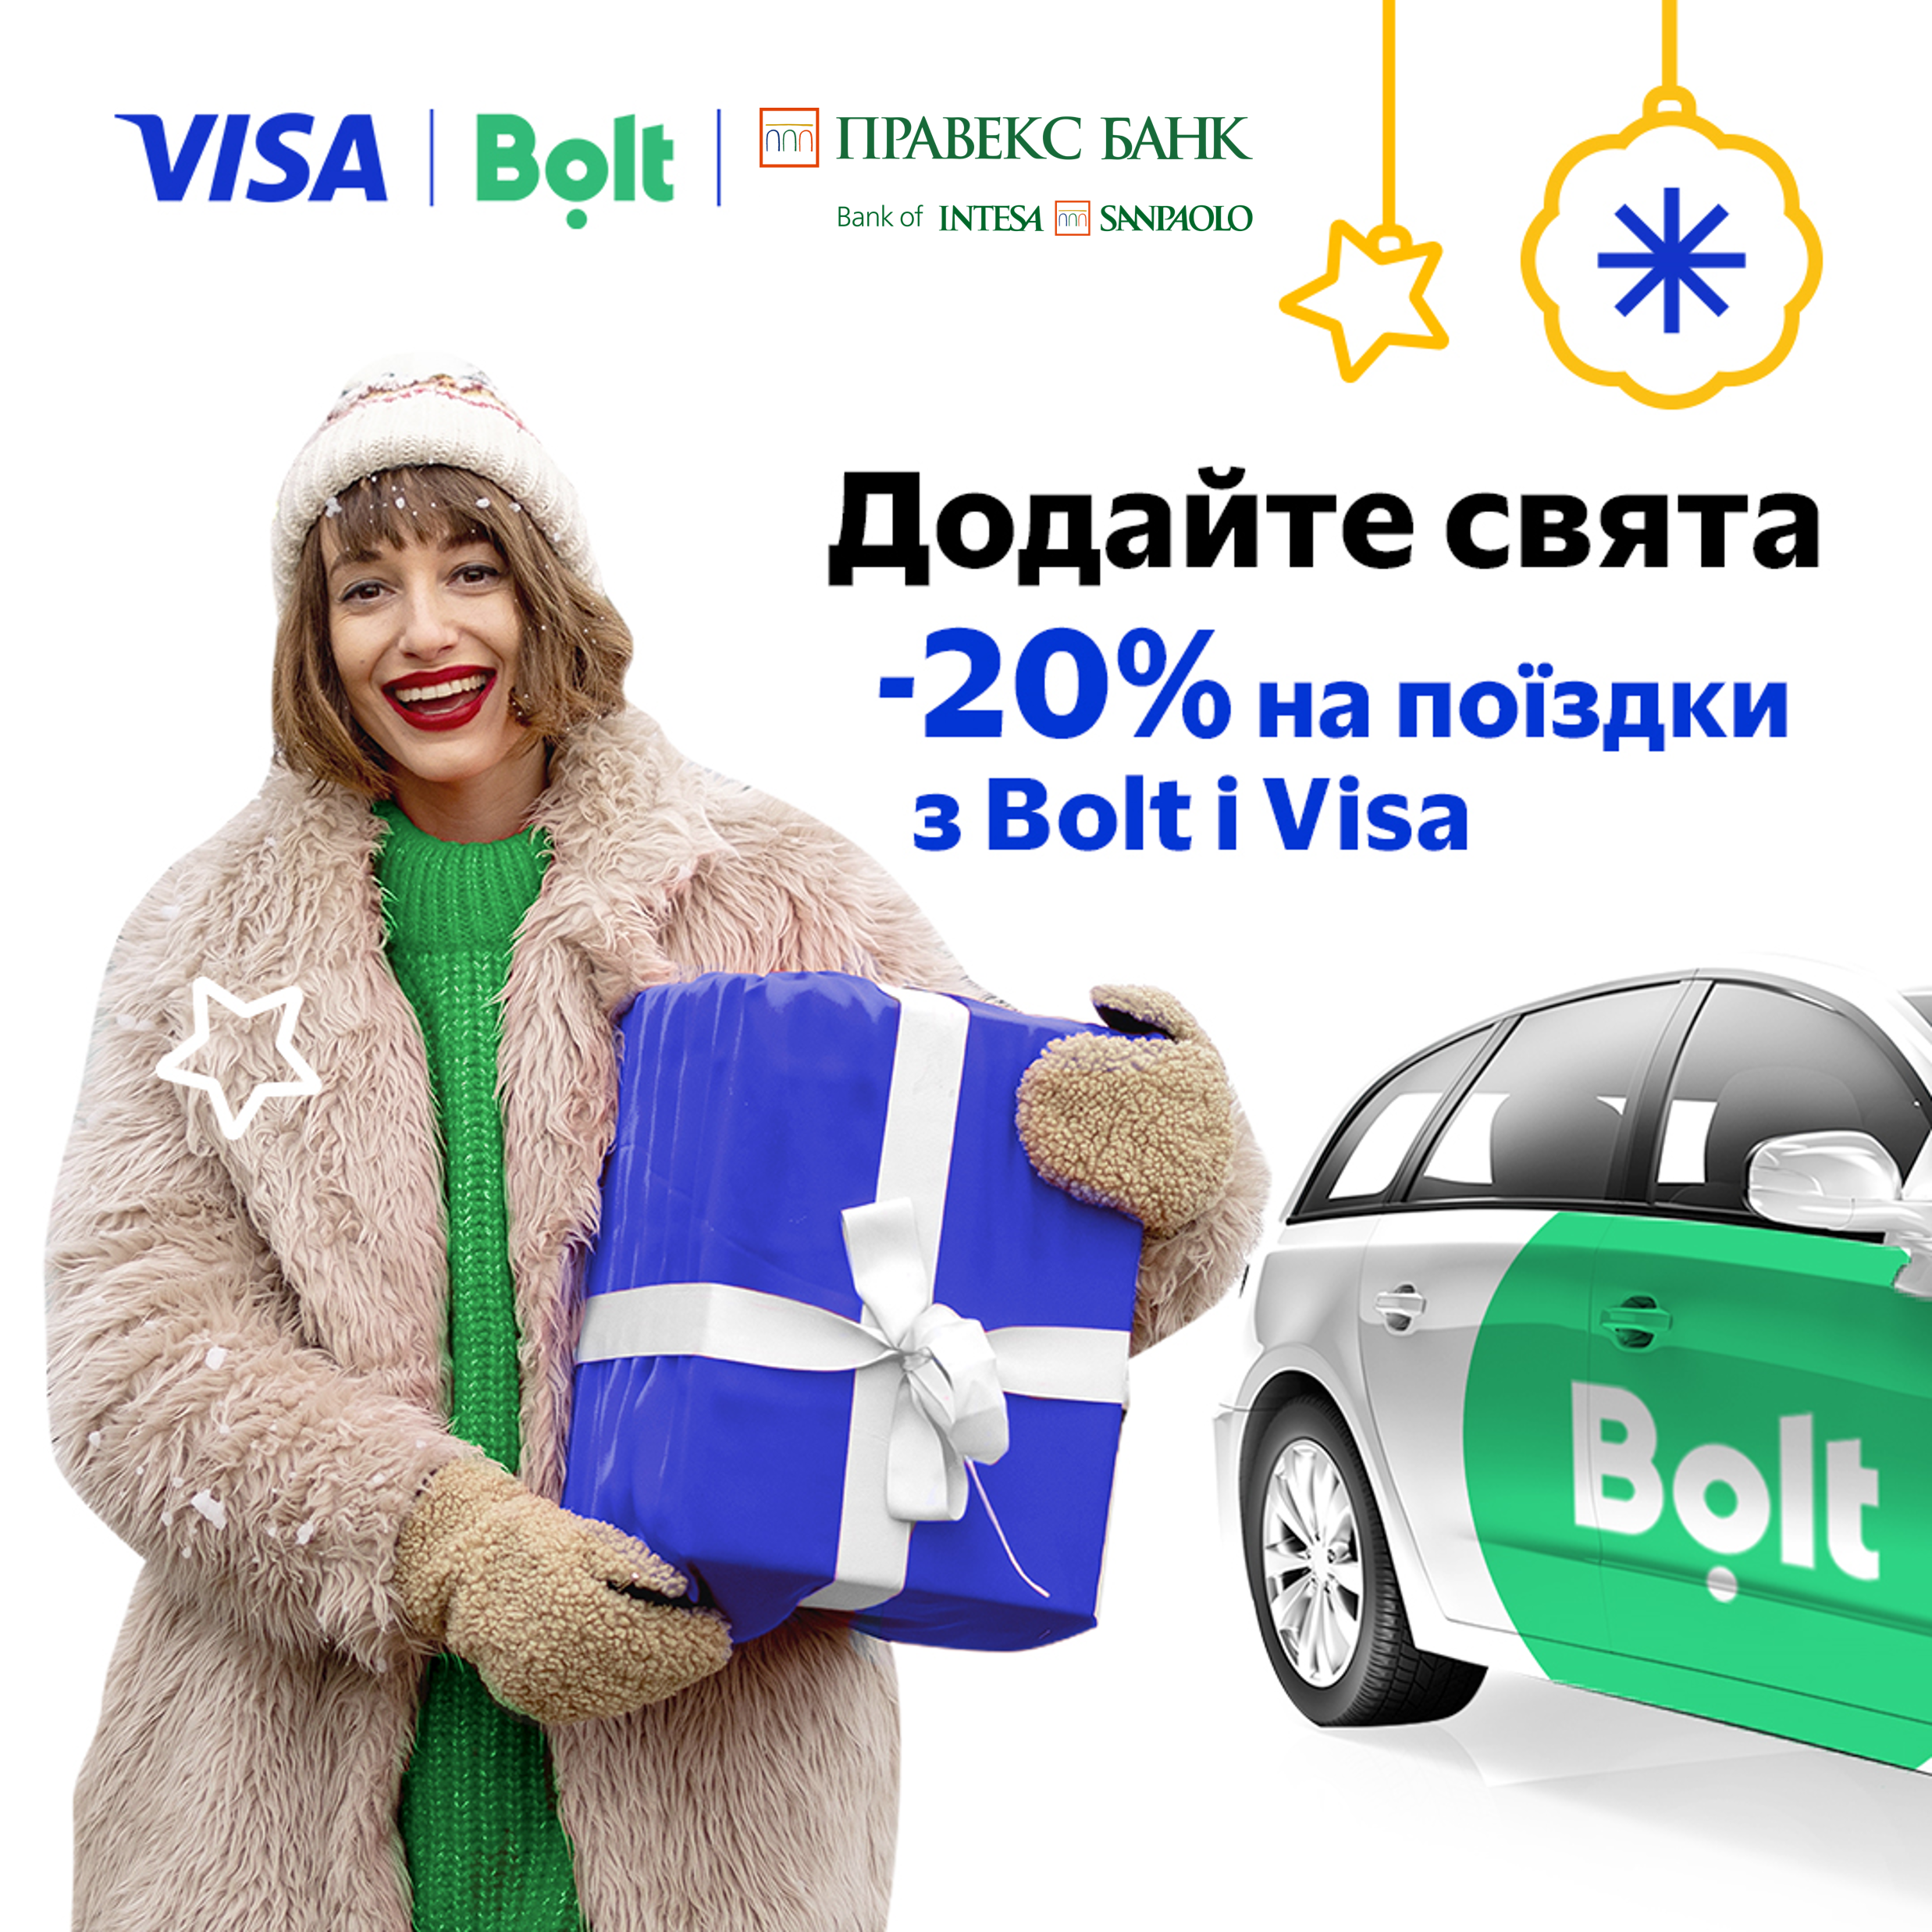 Holiday offer from Visa and Bolt